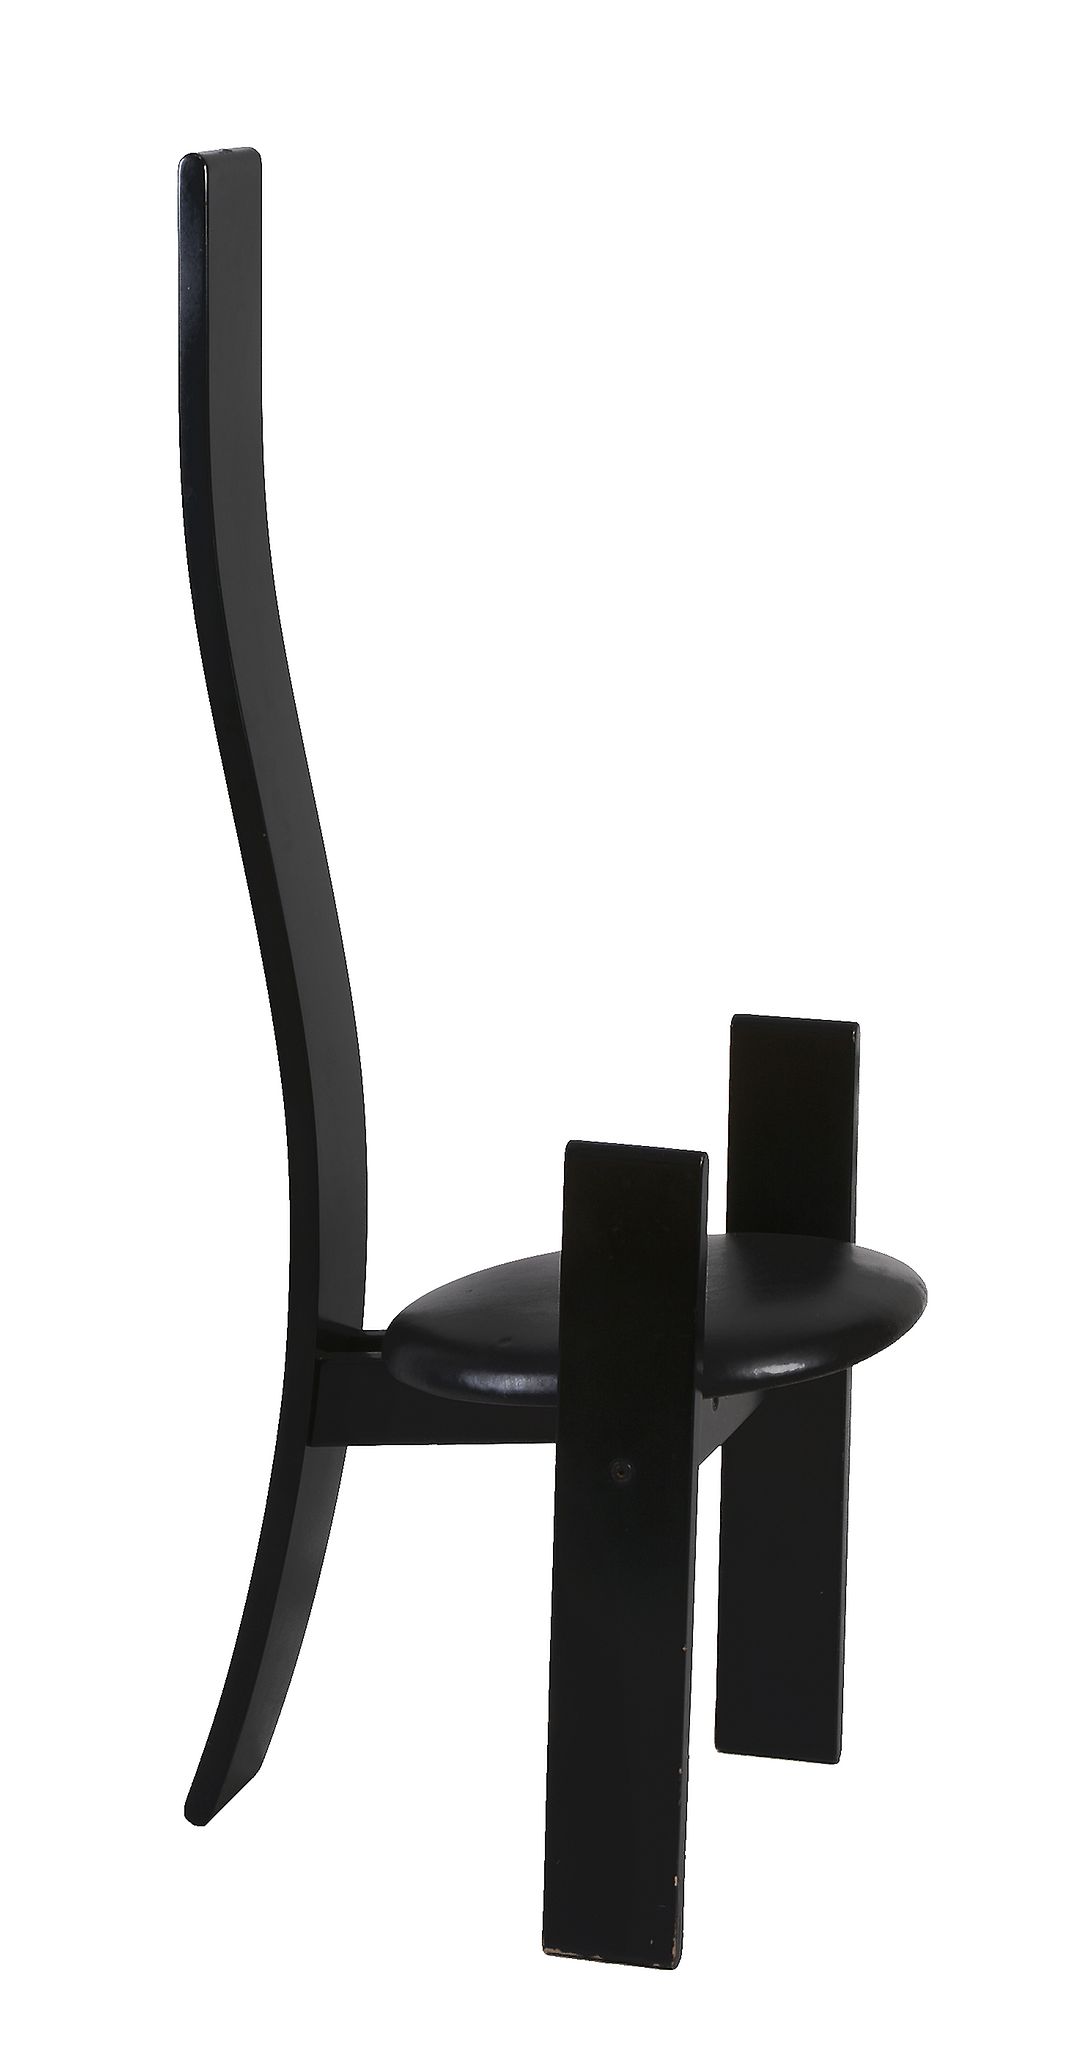 Vico Magistretti for Carlo Poggi, a black lacquered wooden Golem chair, with a black leather seat, - Image 2 of 2